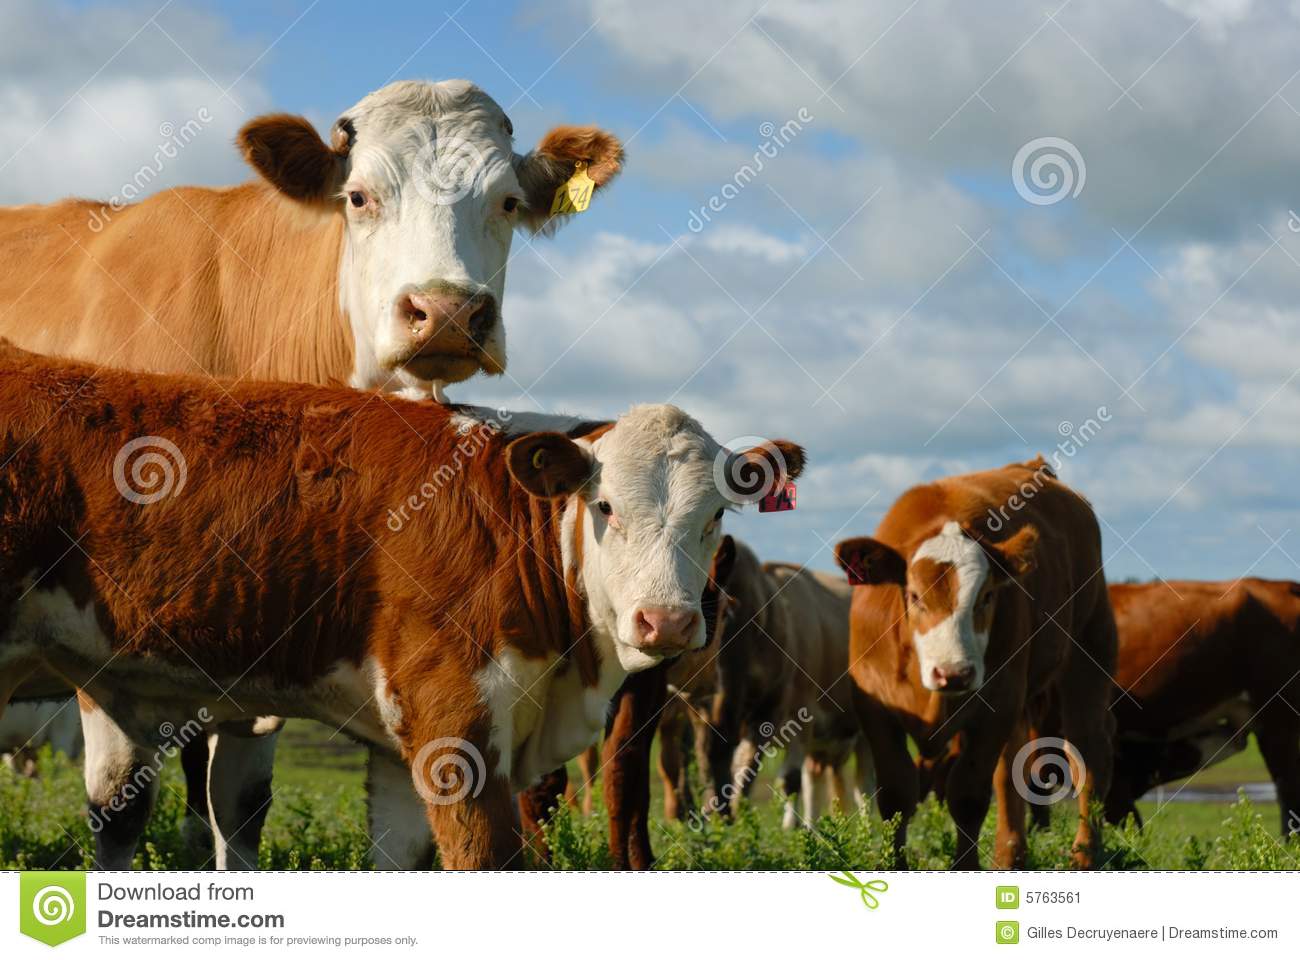 Dairy Cows In A Herd Stock Image   Image  5763561